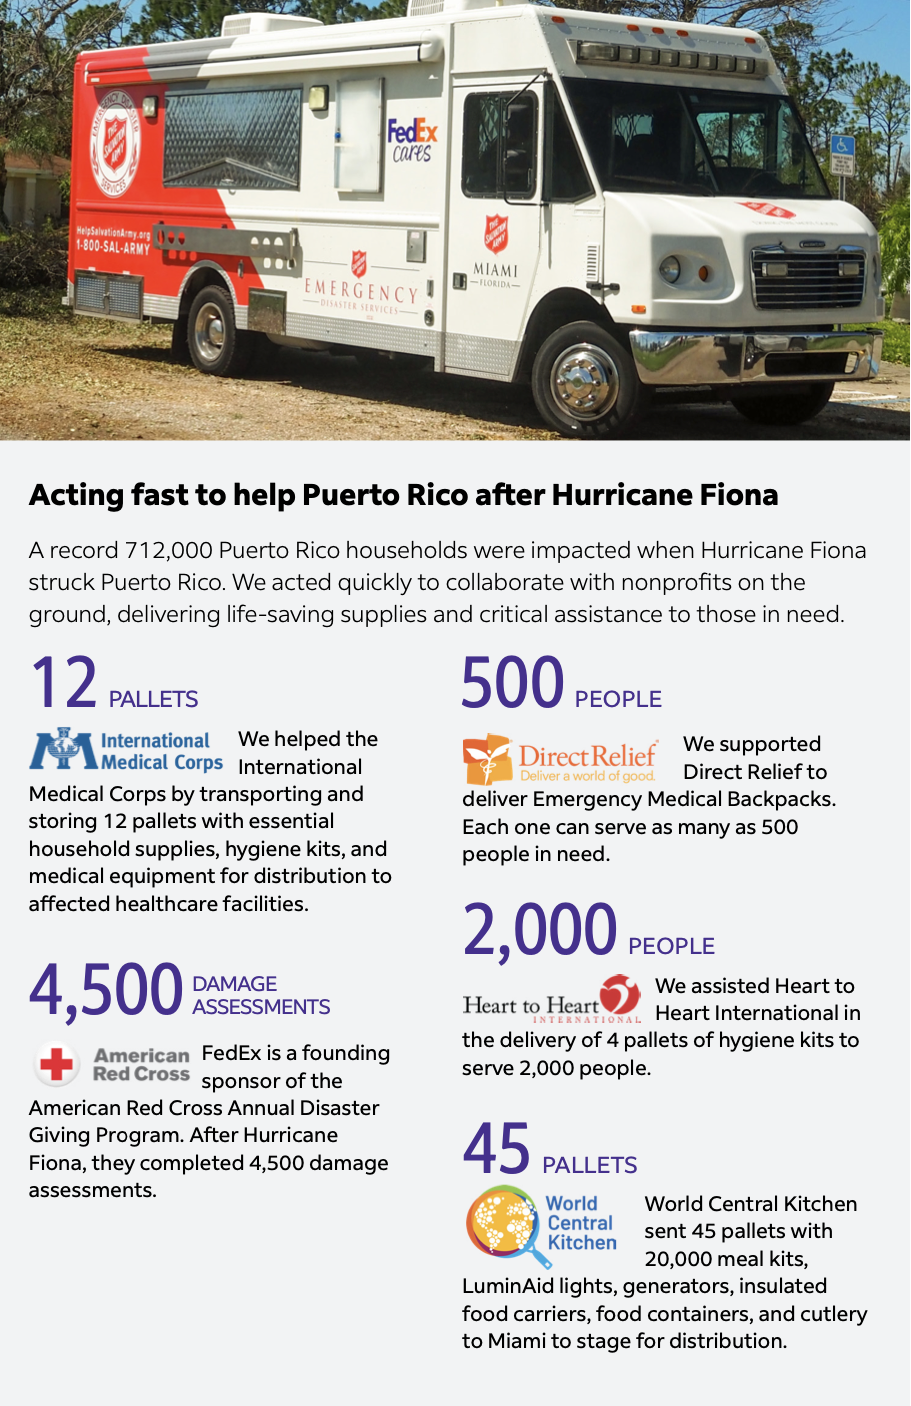 salvation army truck and infographic of relief to Puerto Rico after Hurricane Fiona